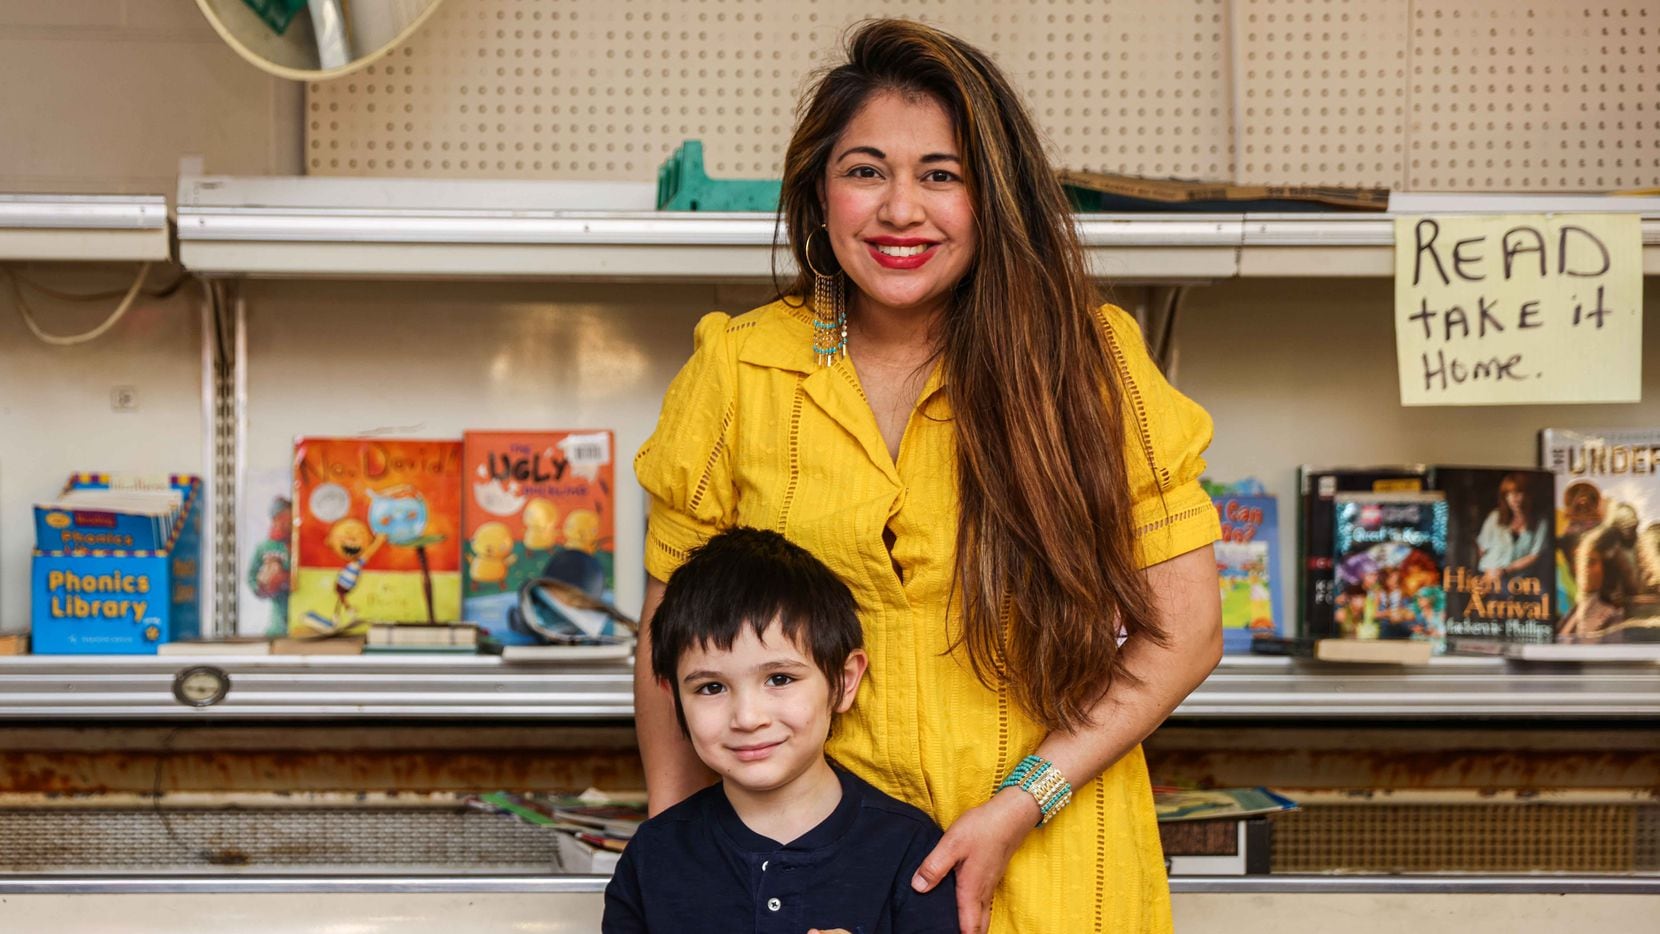 Nelly Cuenca and her 5-year-old son, Bean, who started a library inside Allen’s, a grocery store in South Dallas for underprivileged children in the area who don’t have access to books. The library receives materials through donations. Cuenca also runs a nonprofit for single mothers raising sons, called MaaPaa. The organization provides tutoring services and also hosts a monthly reading circle.